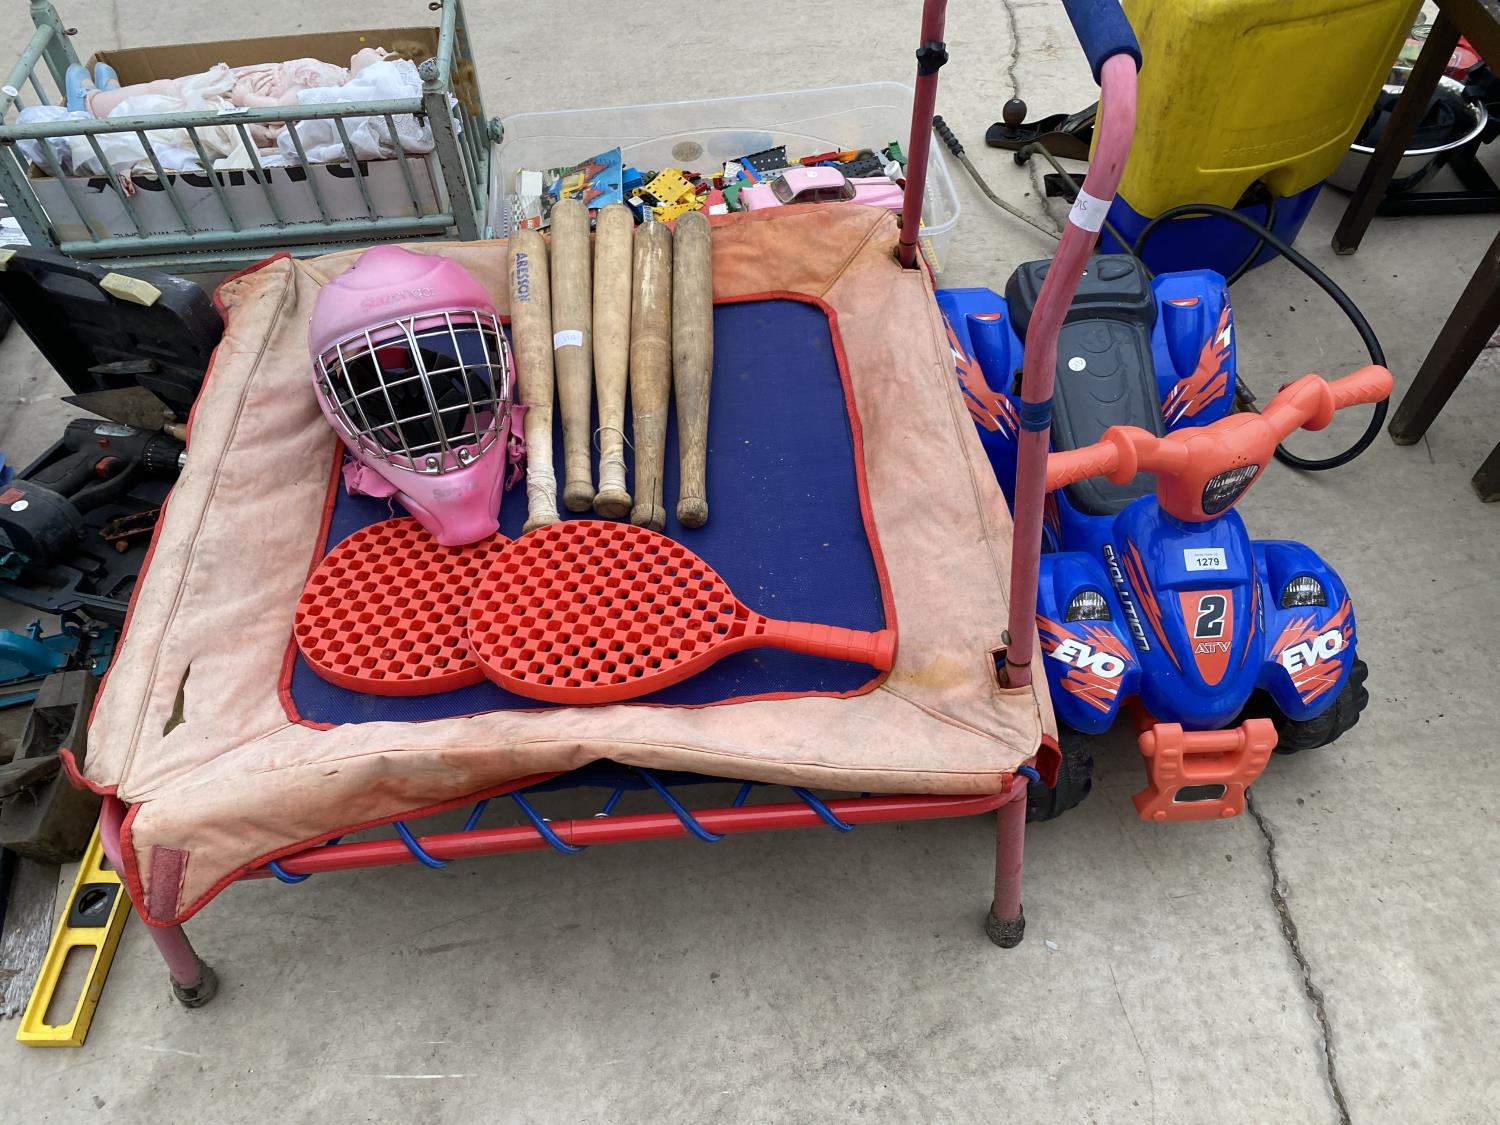 VARIOUS CHILDRENS TOYS TO INCLUDE MINI TRAMPOLINE, ROUNDERS BATS, RIDE ON TOY ETC.